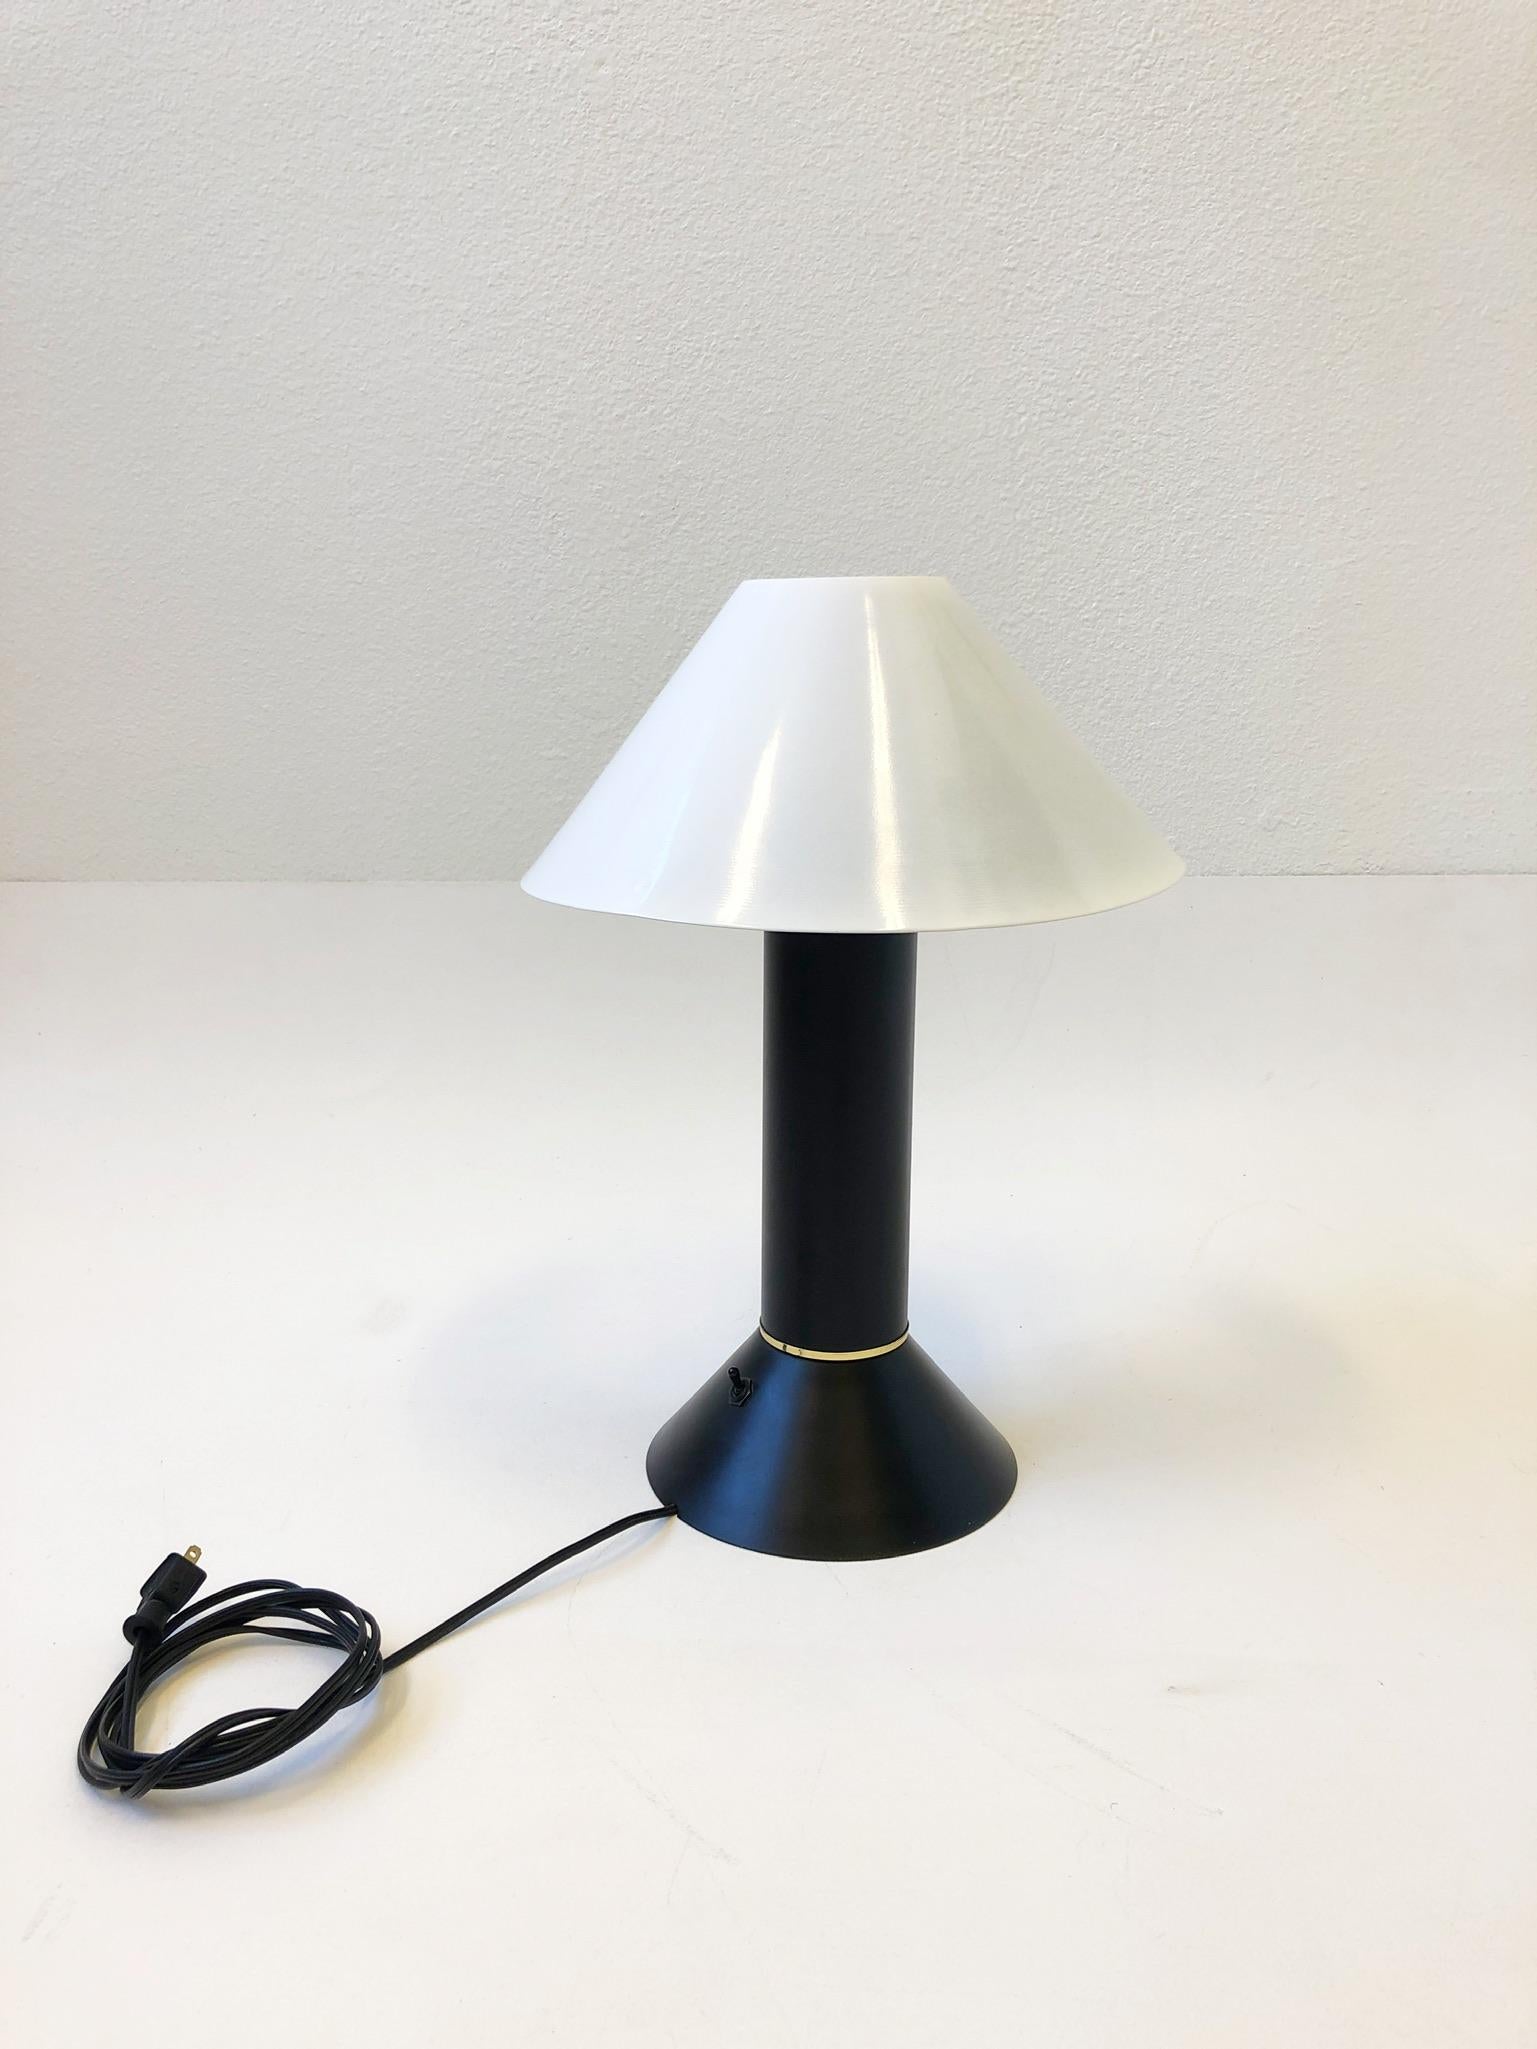 Powder-Coated Black and White with Brass Details Table Lamp by Ron Rezek For Sale